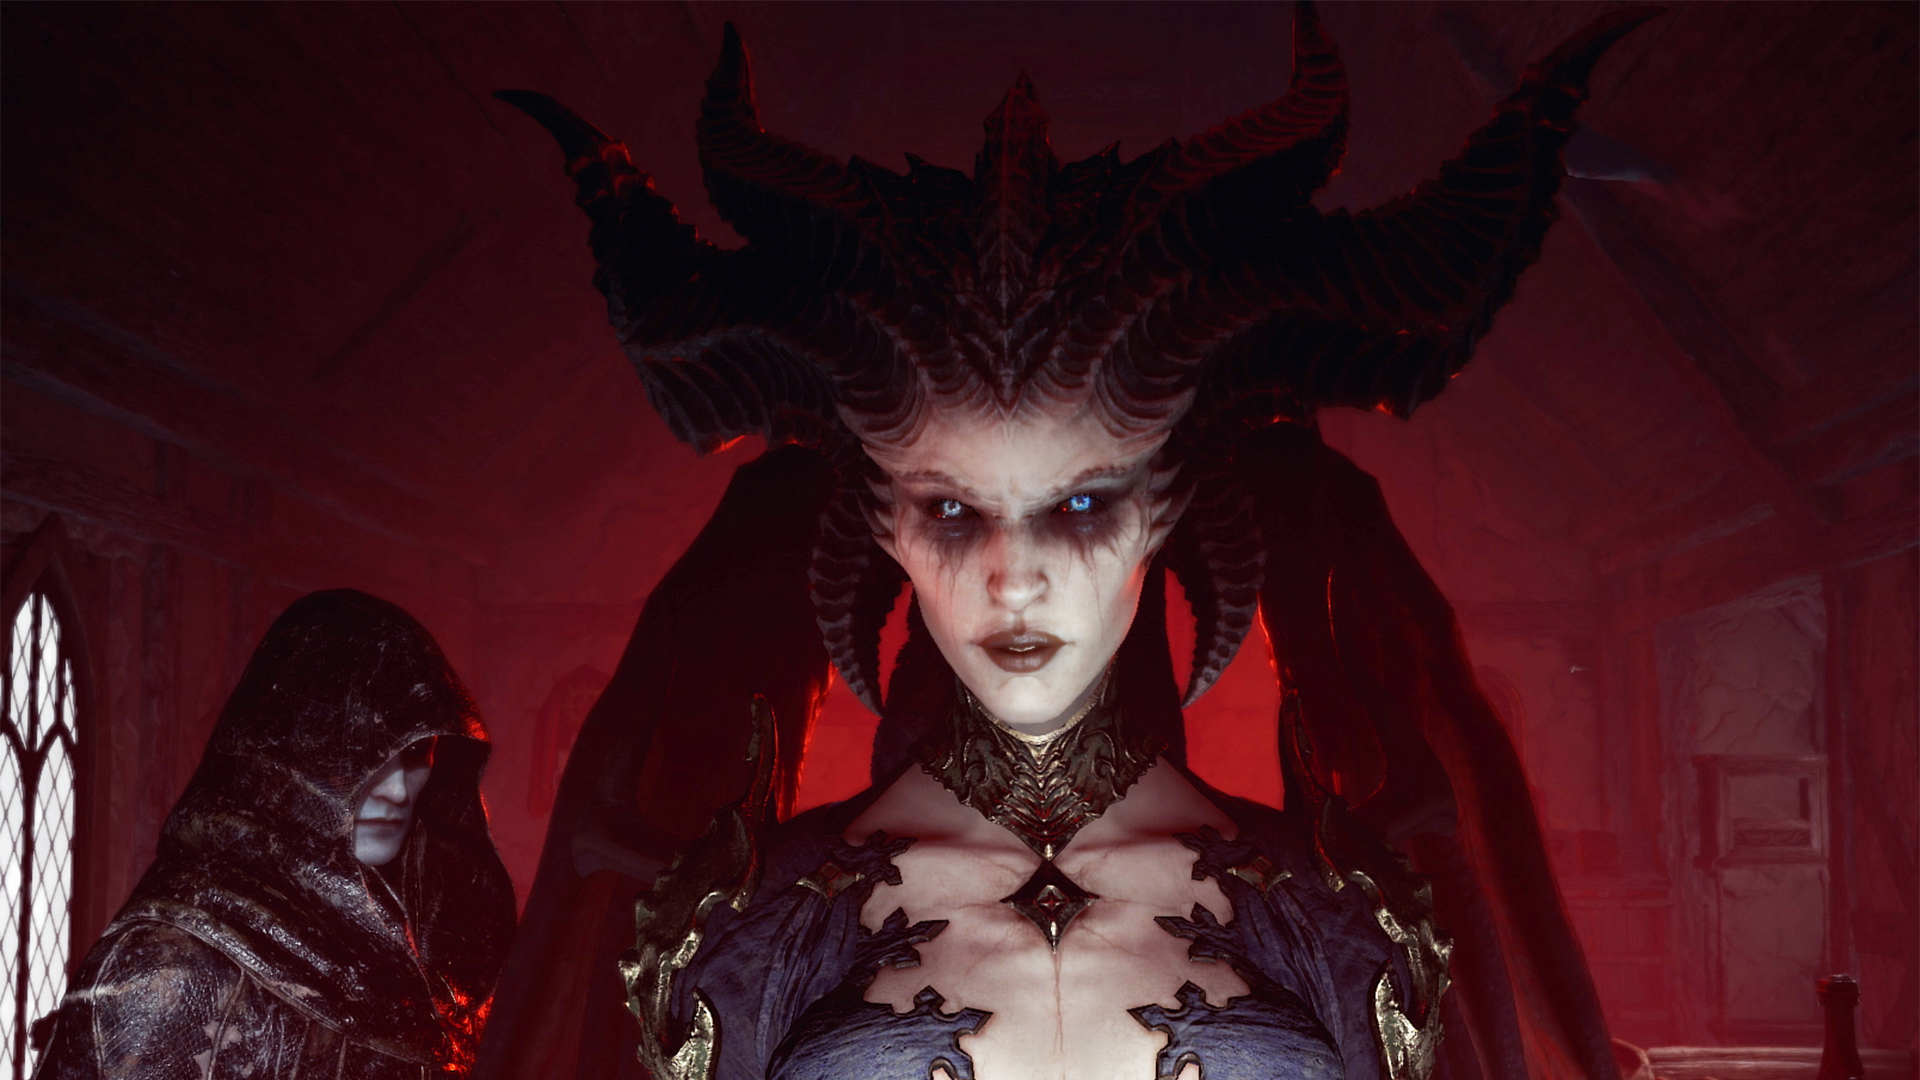 Diablo 4 Launches in 2023, Coming to PC, Xbox and PlayStation